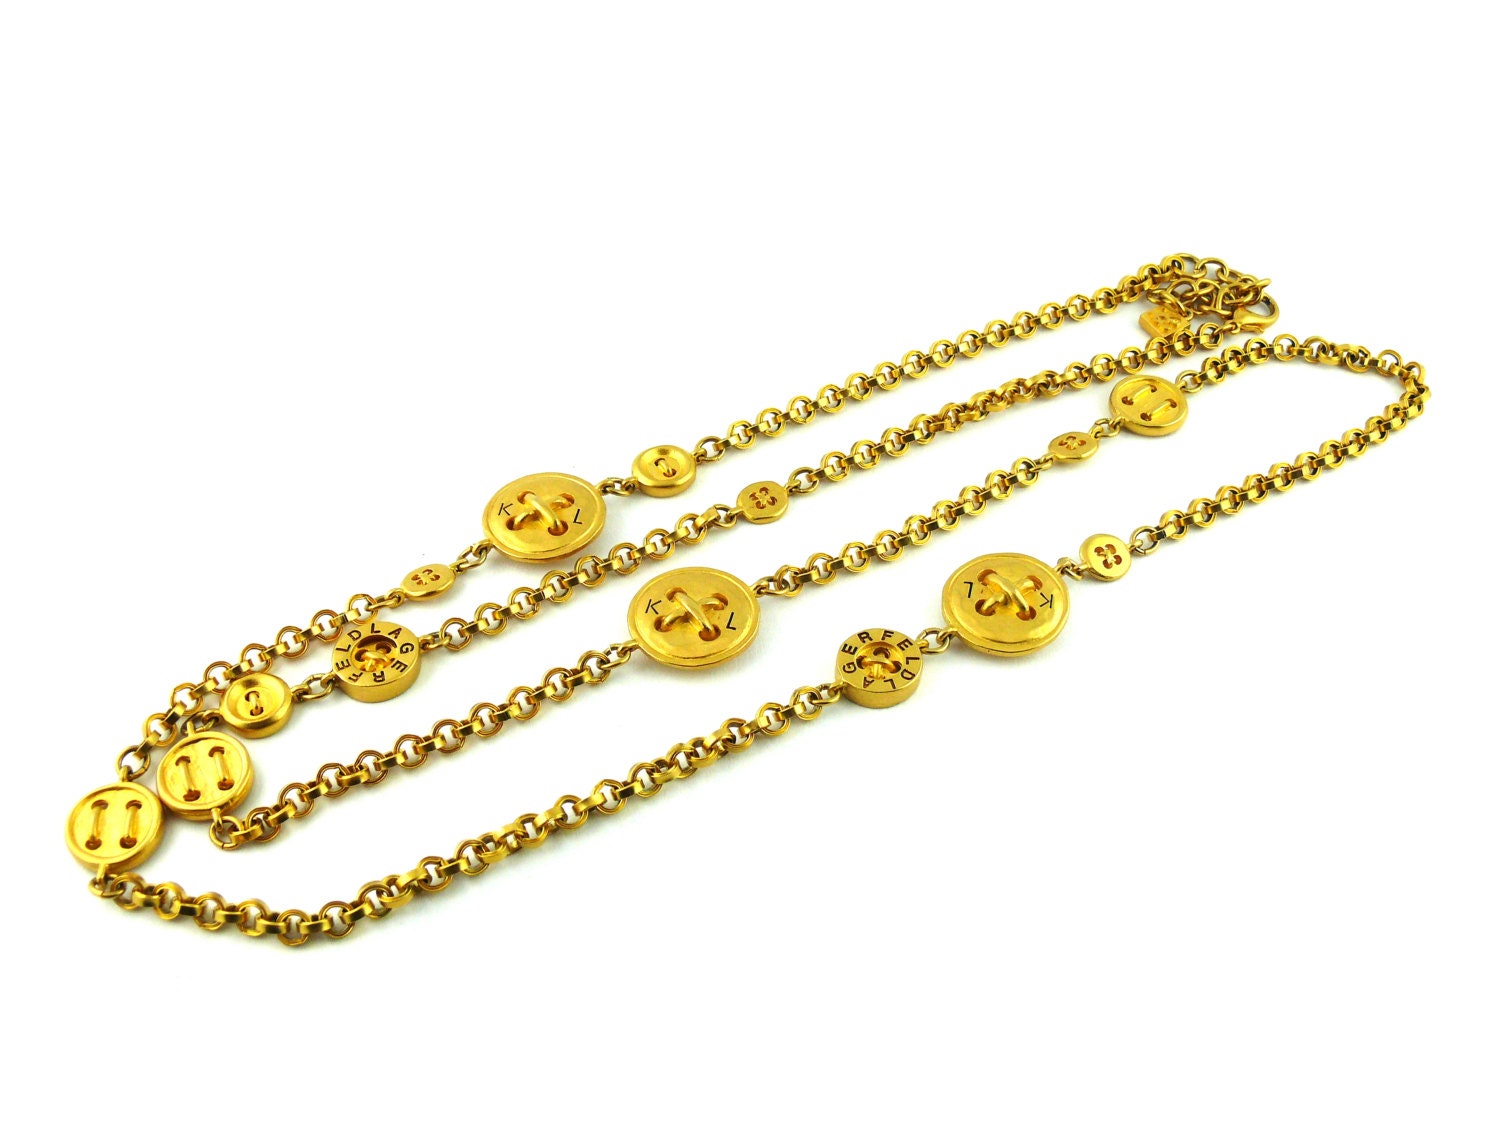 D.NOLO - We have a few of the vintage Chanel button necklaces back